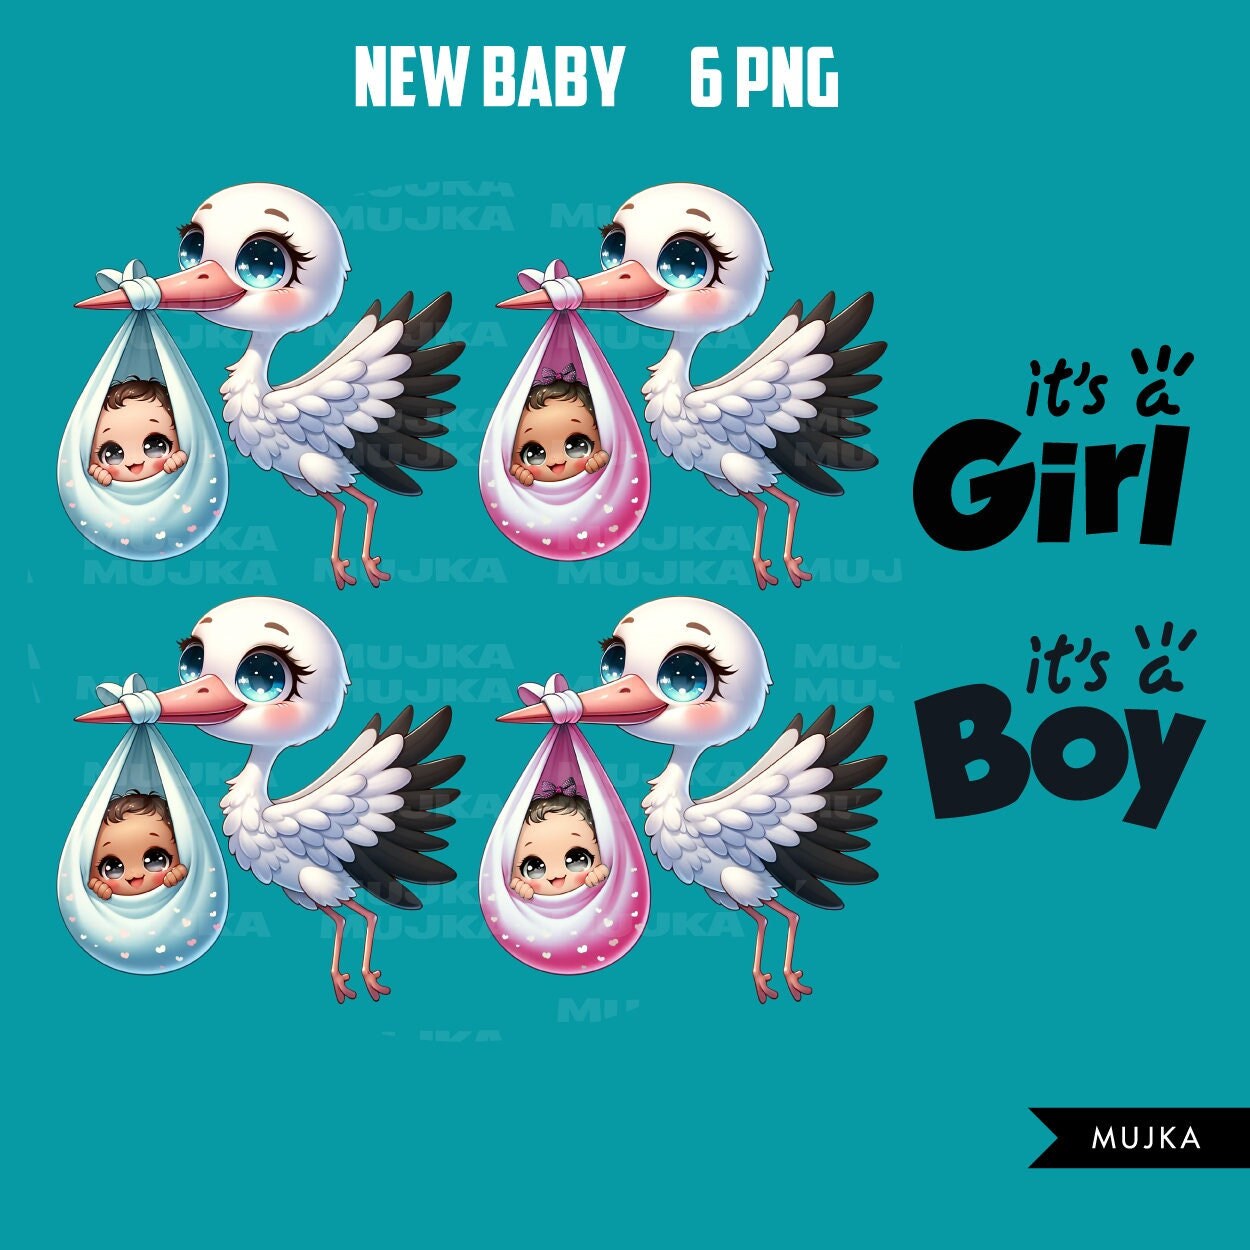 New Baby PNG Clipart, stork baby shower, Newborn illustrations, it's a boy, it's a girl, black baby graphics, baby stickers, printables